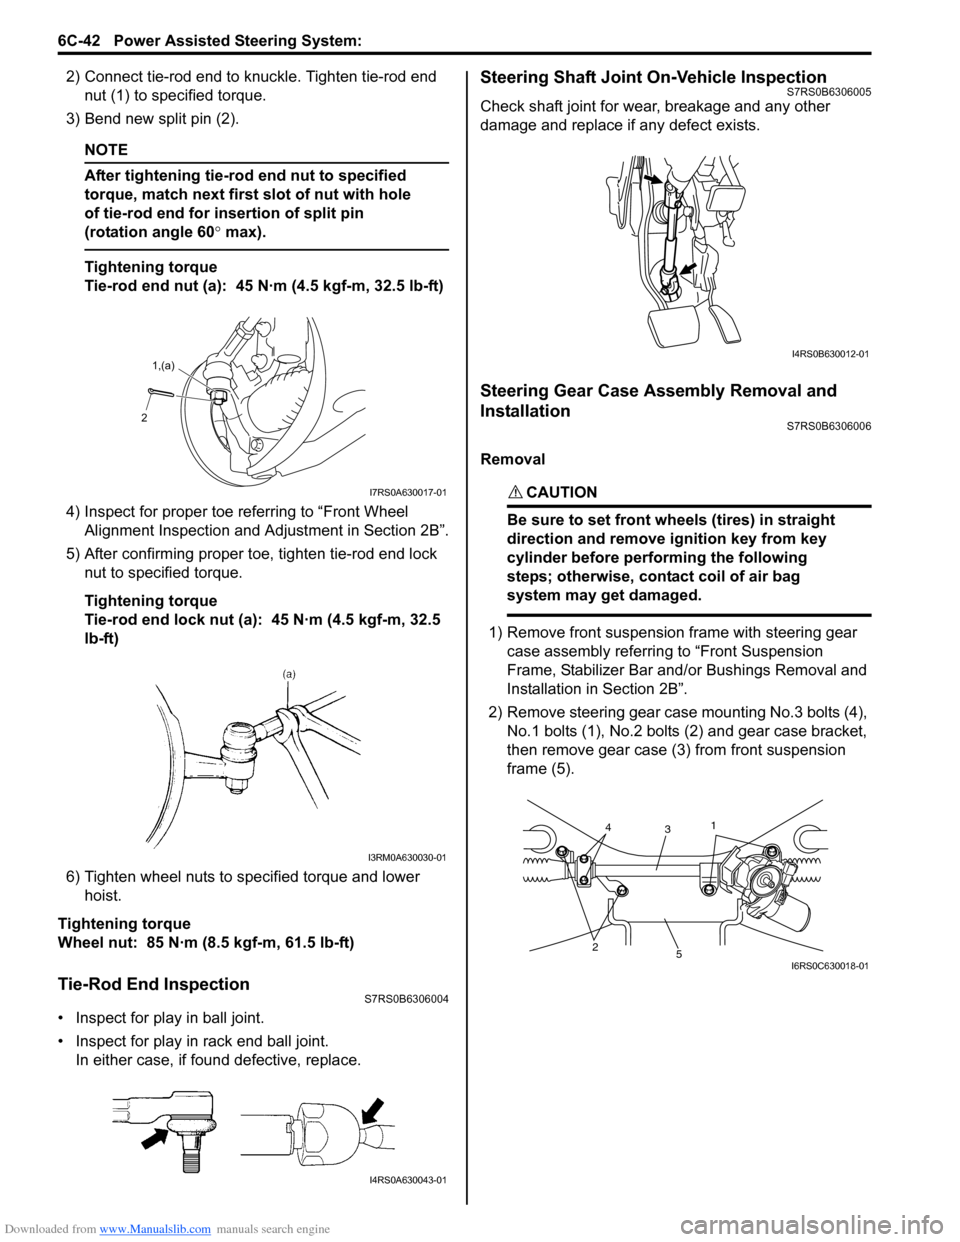 SUZUKI SWIFT 2006 2.G Service Service Manual Downloaded from www.Manualslib.com manuals search engine 6C-42 Power Assisted Steering System: 
2) Connect tie-rod end to knuckle. Tighten tie-rod end nut (1) to spec ified torque.
3) Bend new split p